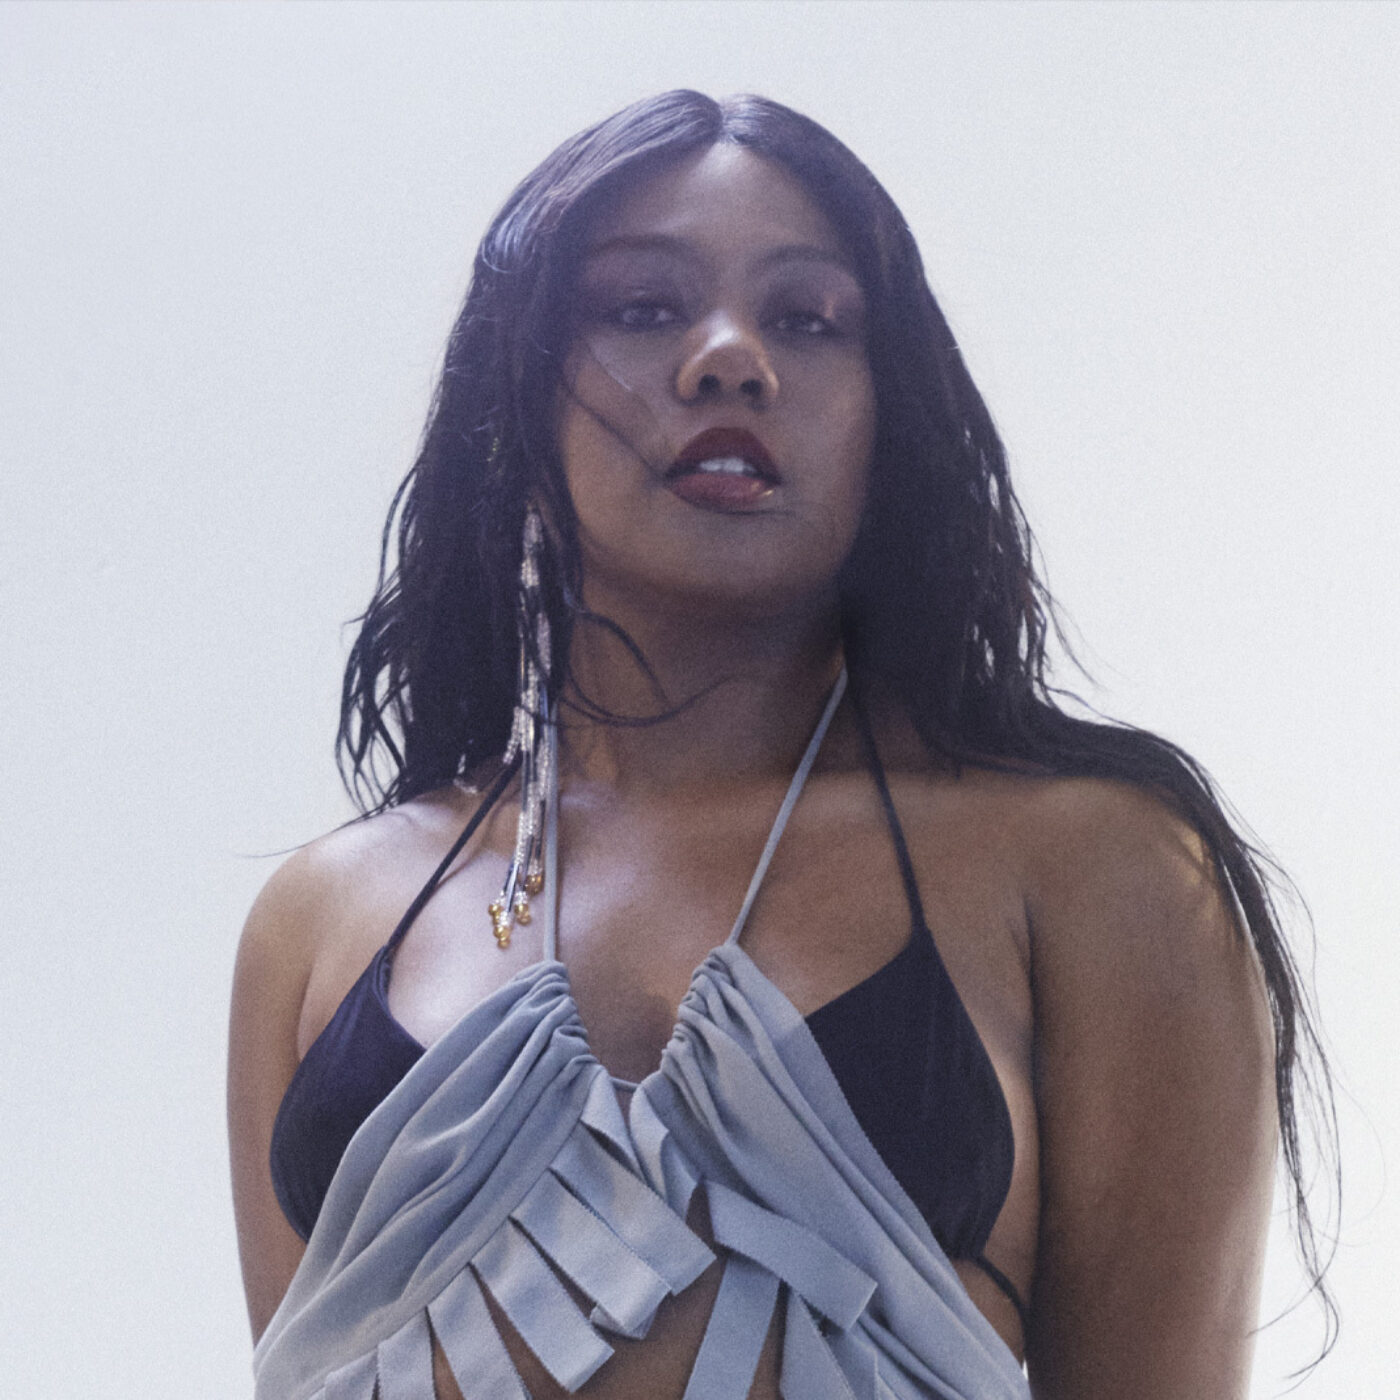 [Remezcla] Meet Lyzza, the Brazilian Artist Shaping Club Music While On a Quest to Find Herself